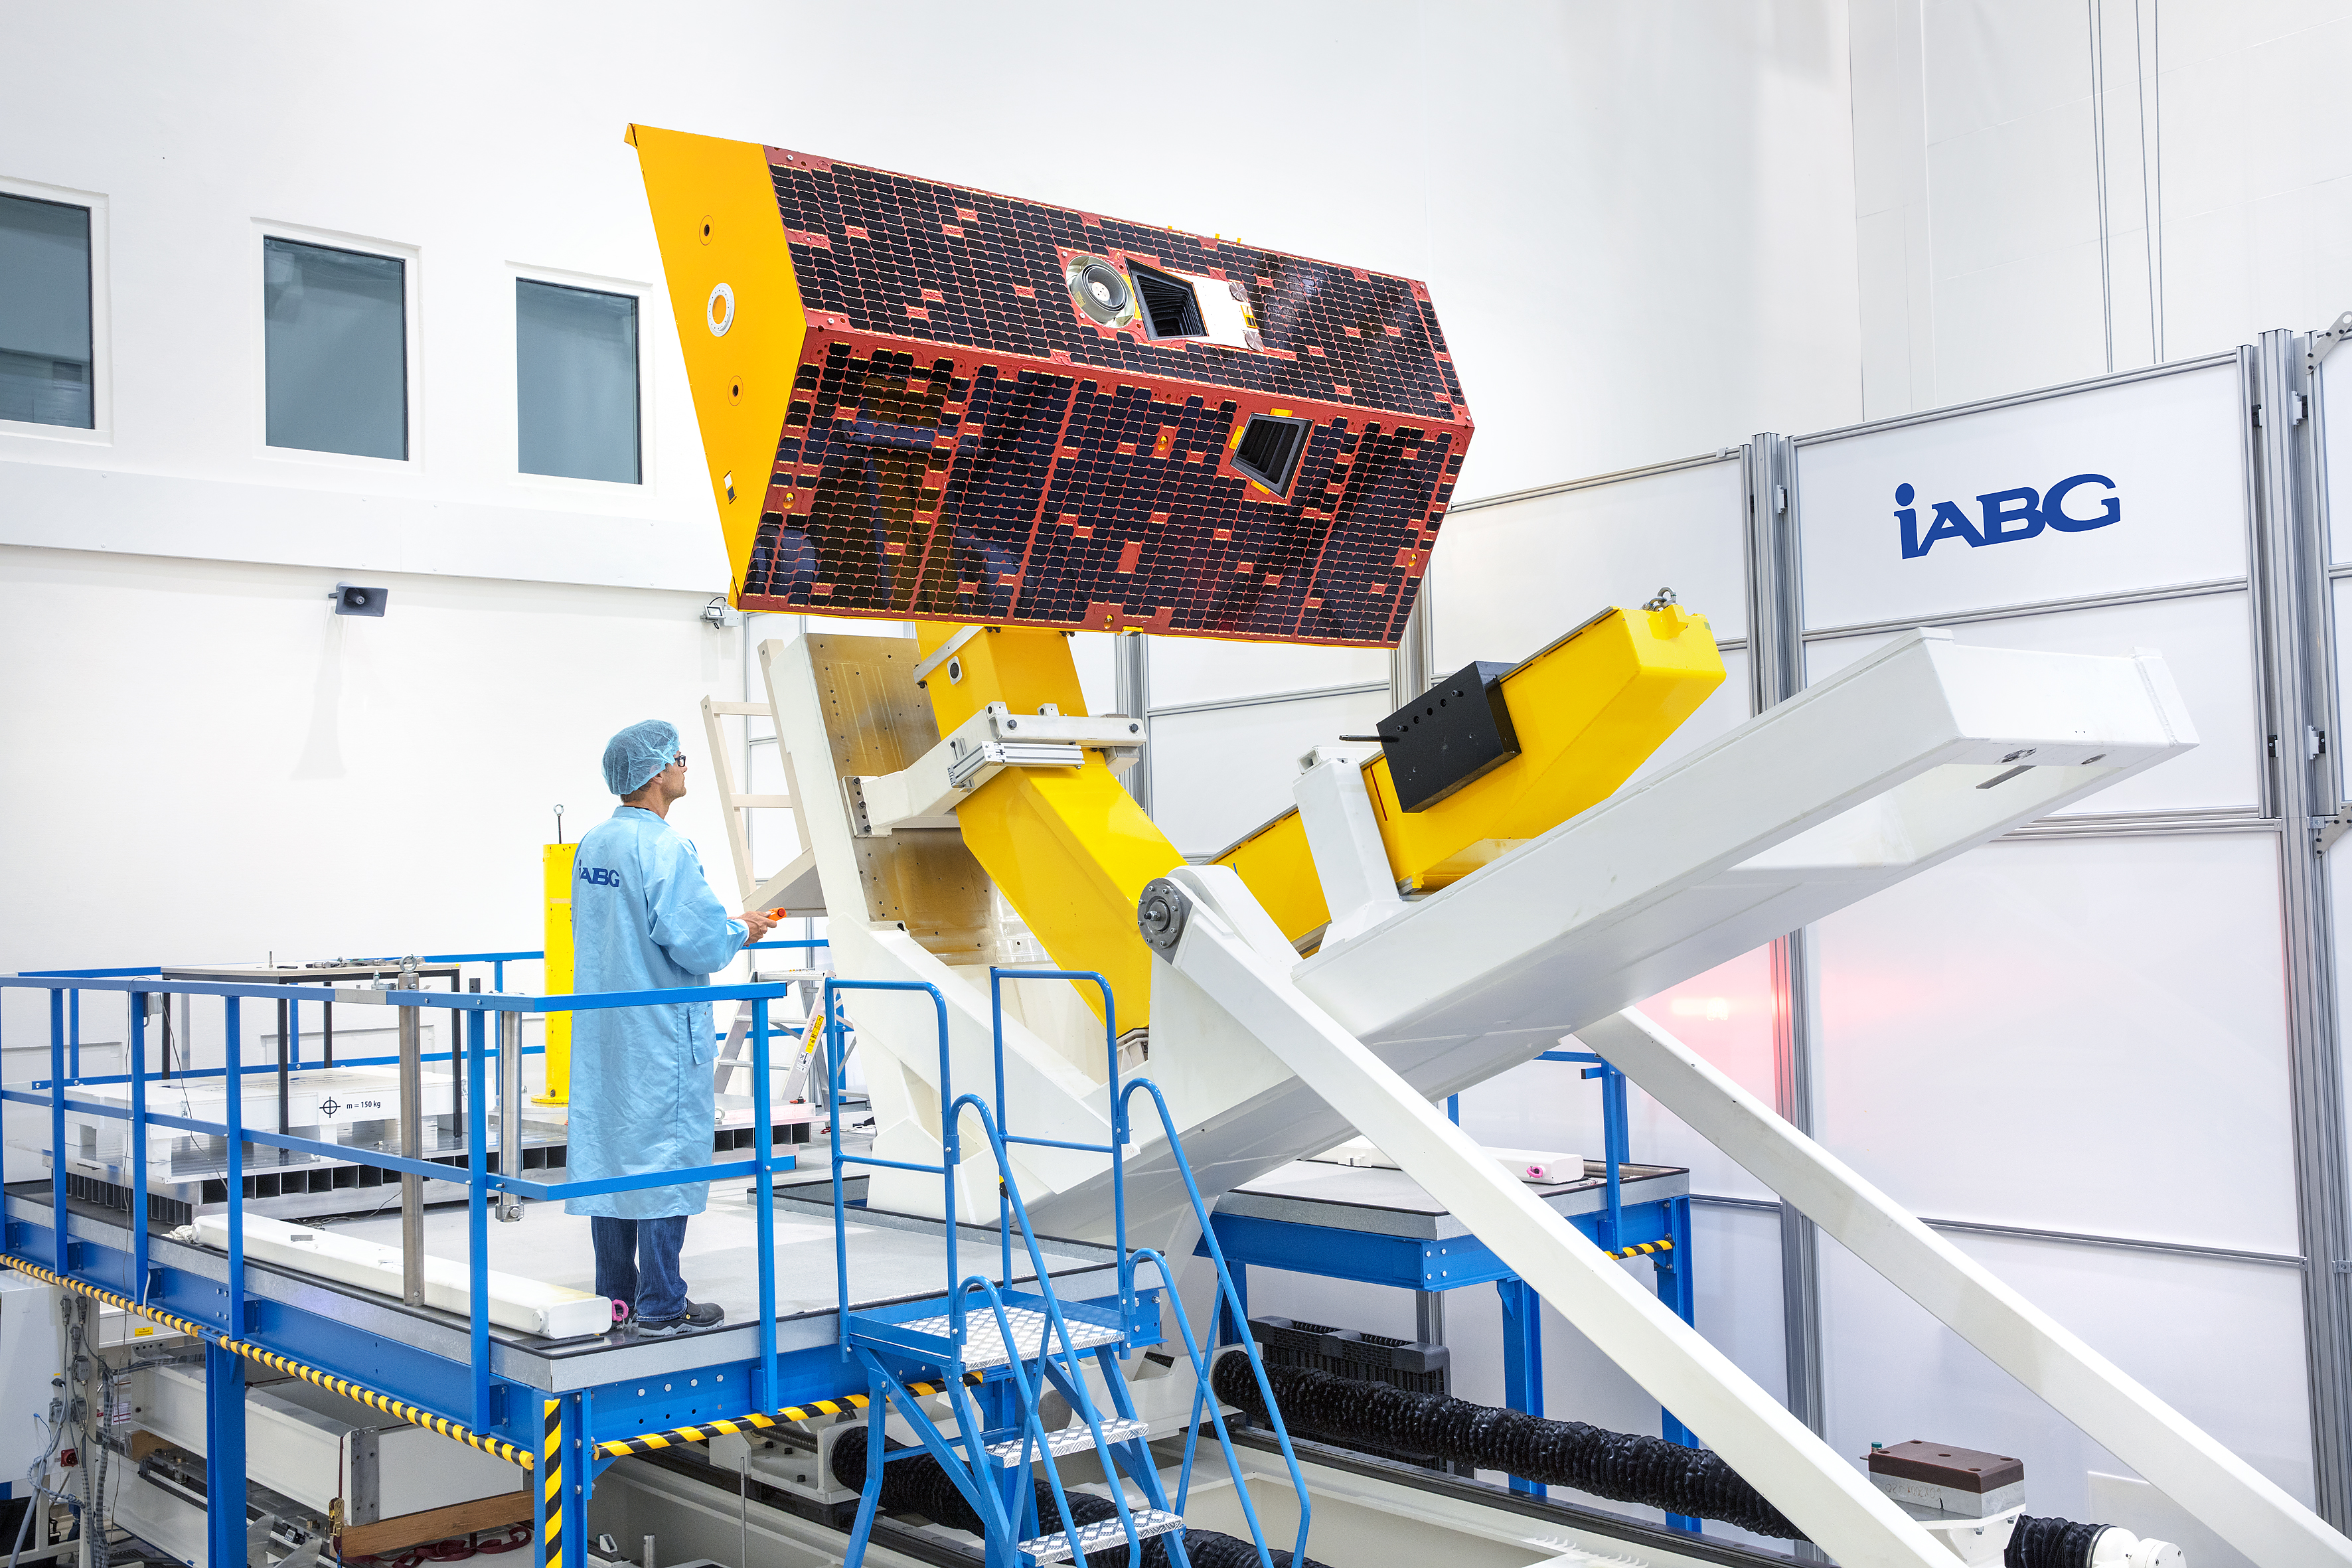 The GRACE-FO satellites were assembled by Airbus Defence and Space in Germany. The photo shows one of the satellites in the testing facility of IABG, an Airbus subcontractor, in Munich (view 3). 